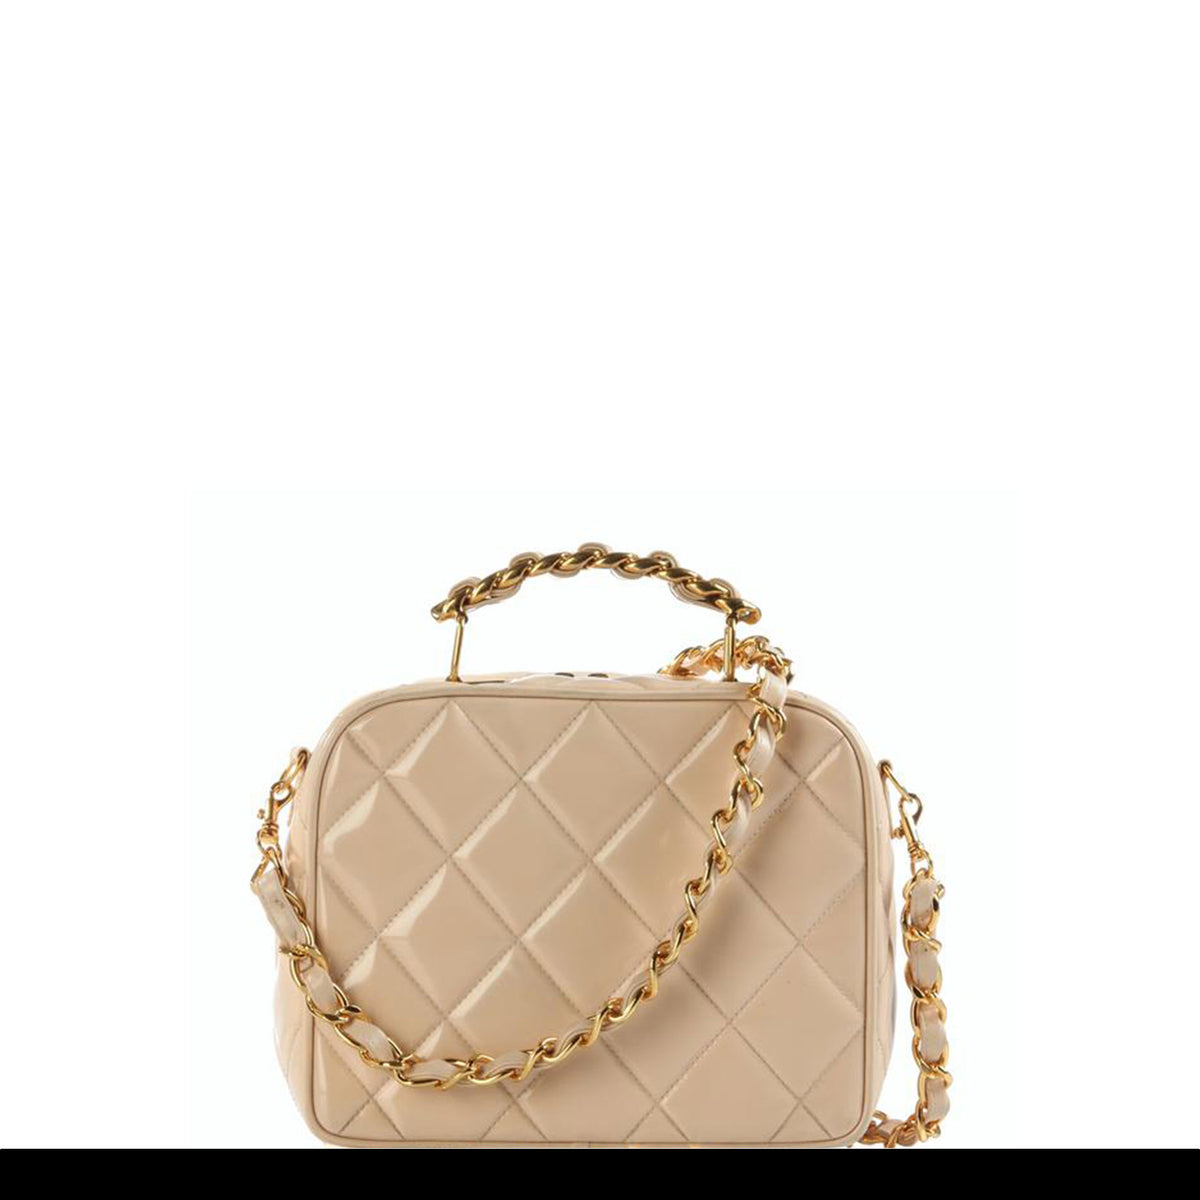 Chanel Camera Mini Quilted Vintage Rare Beige Nude Patent Cross